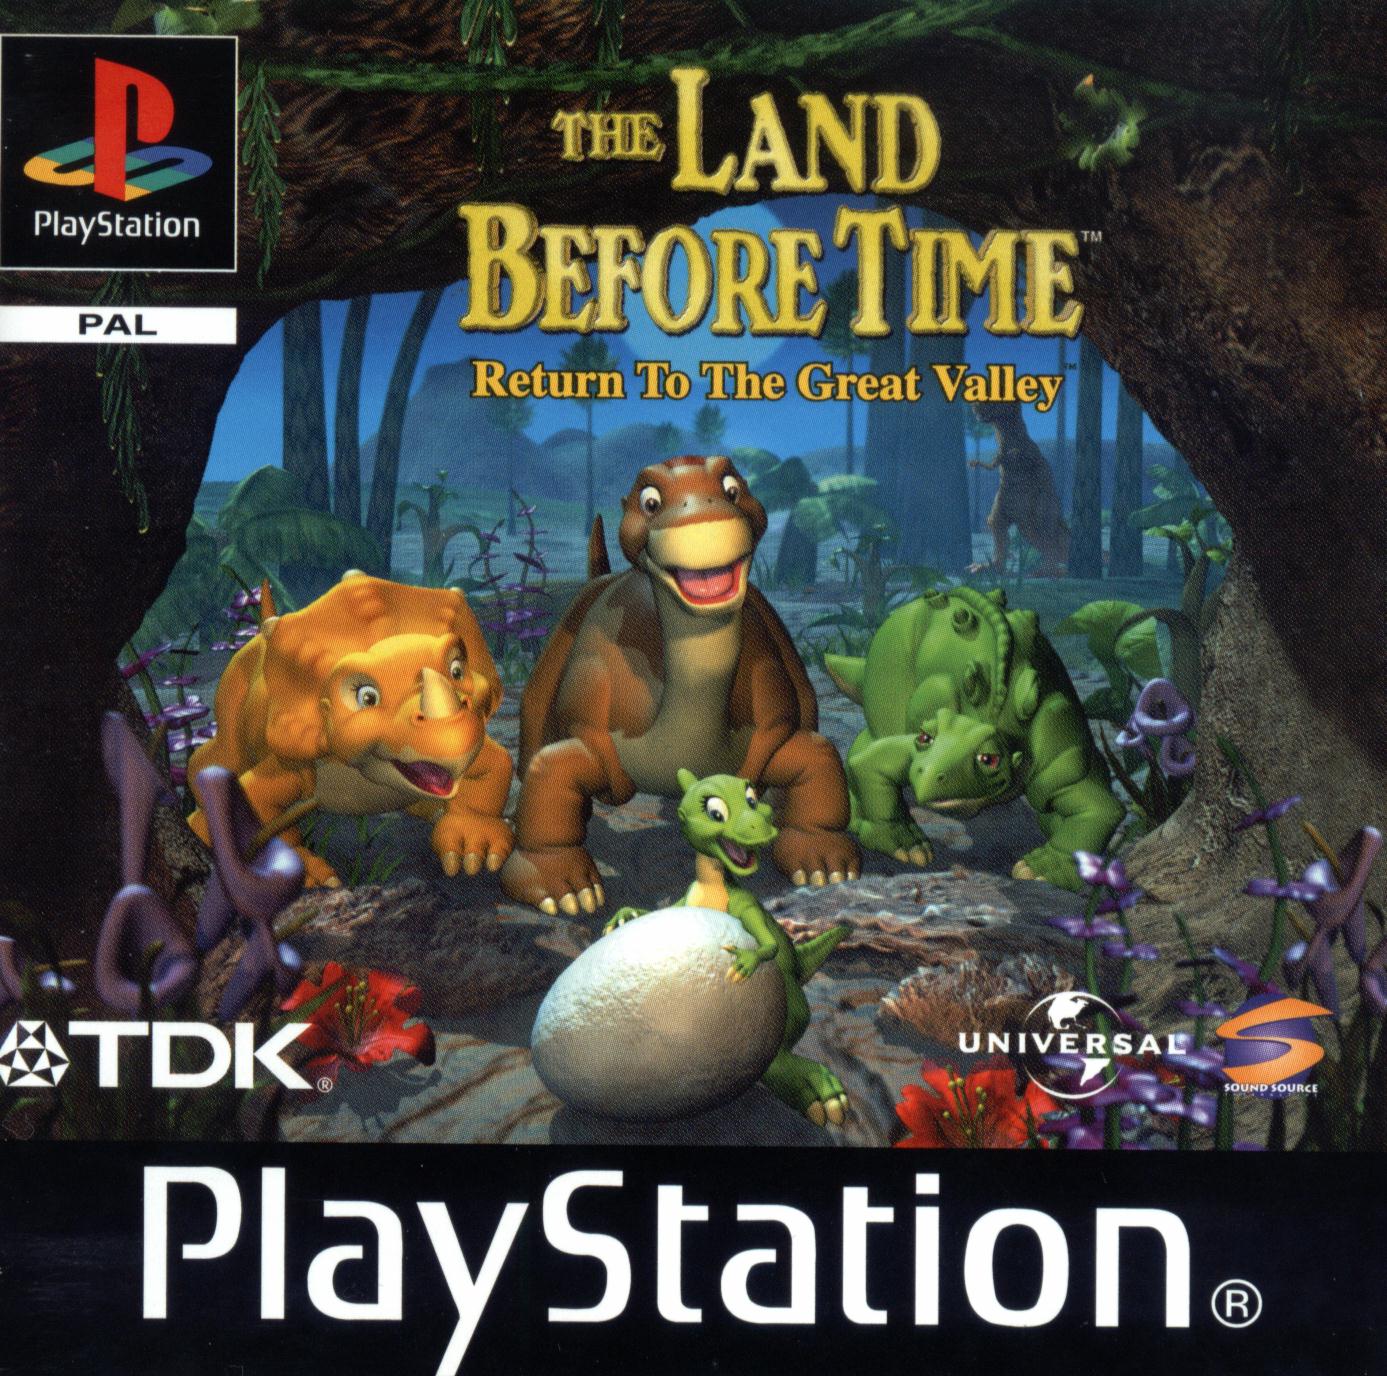 PLAYSTATION (PS2) COVER